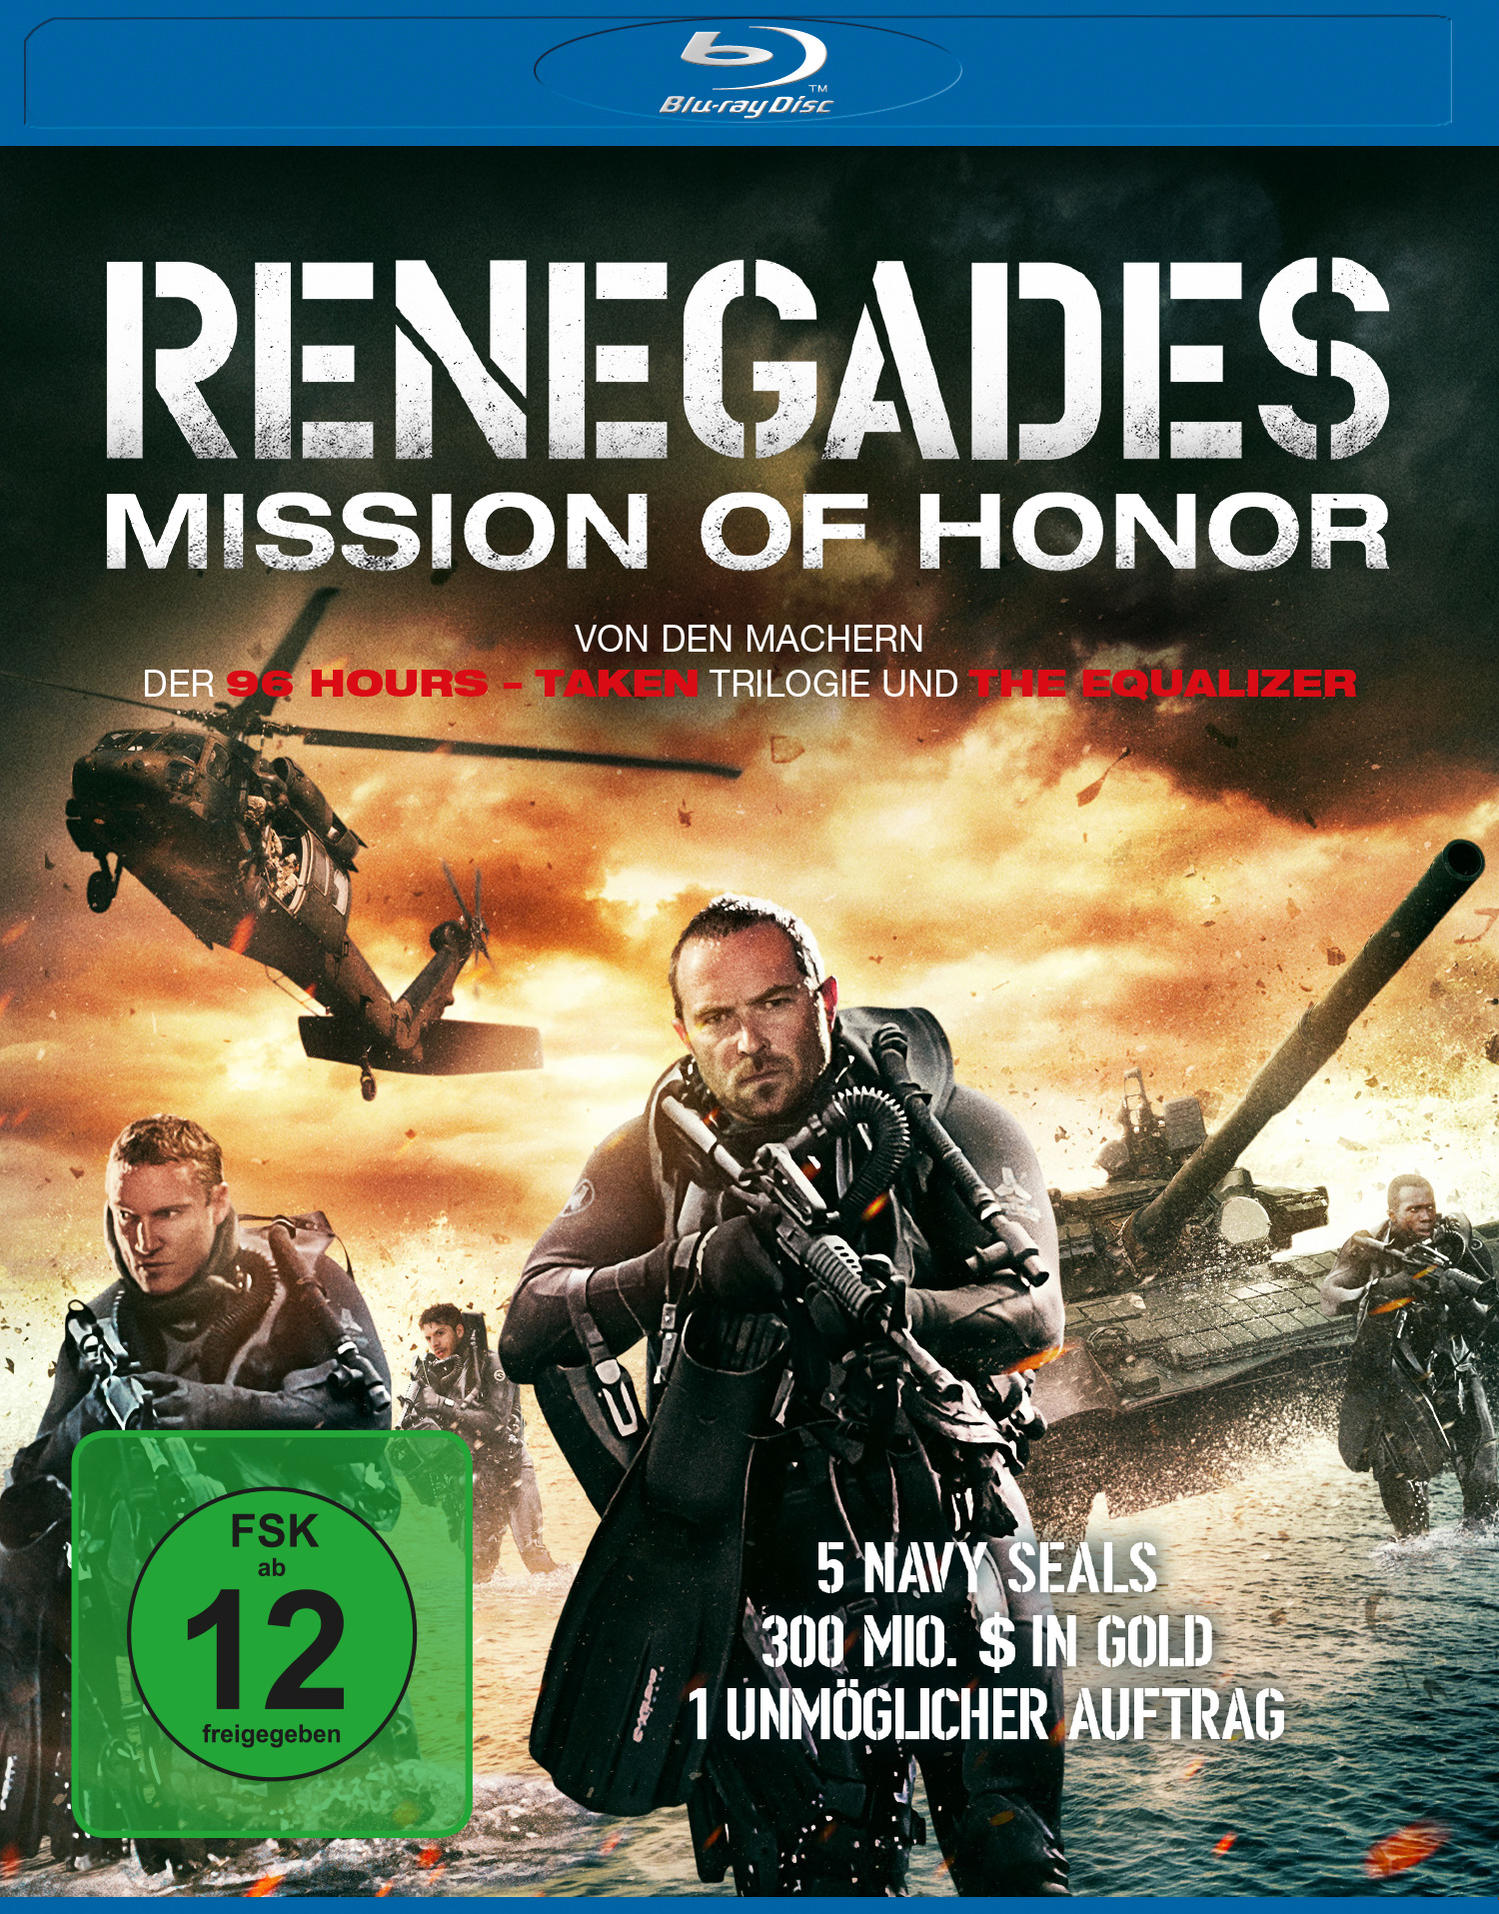 Renegades - Mission of Blu-ray Honor